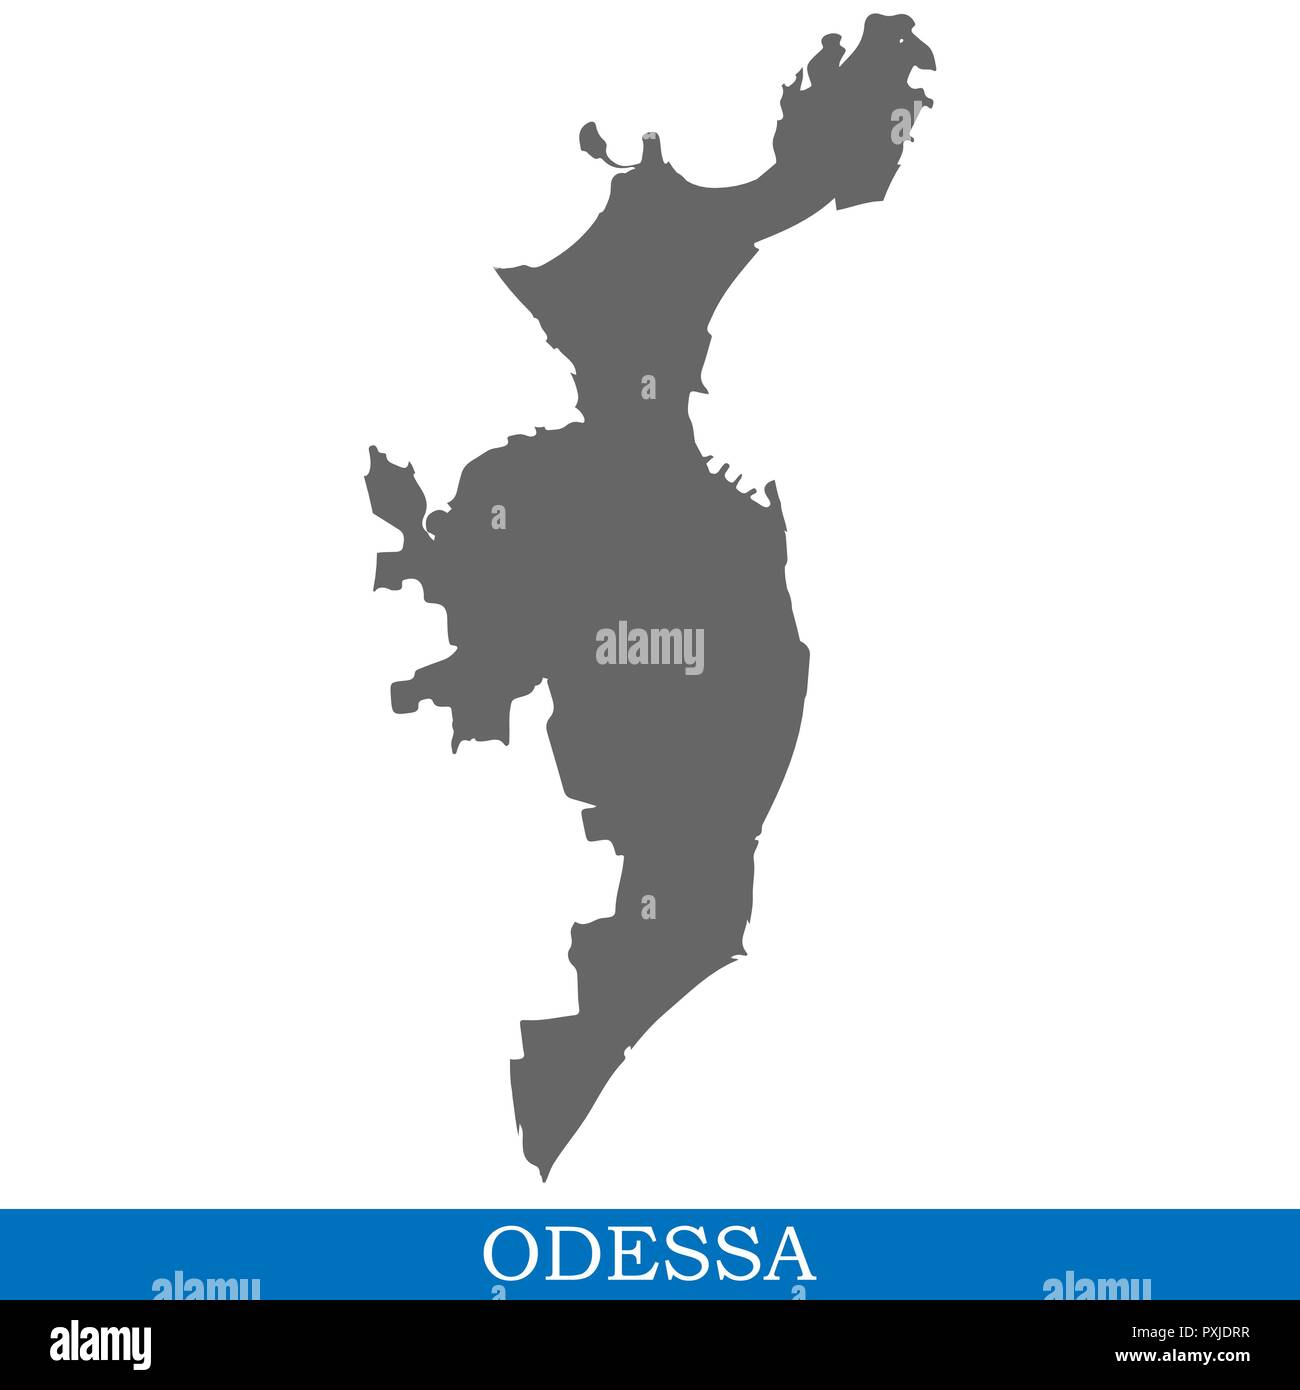 High Quality Map Of Odessa Is A City In Ukraine With Borders Of Districts PXJDRR 